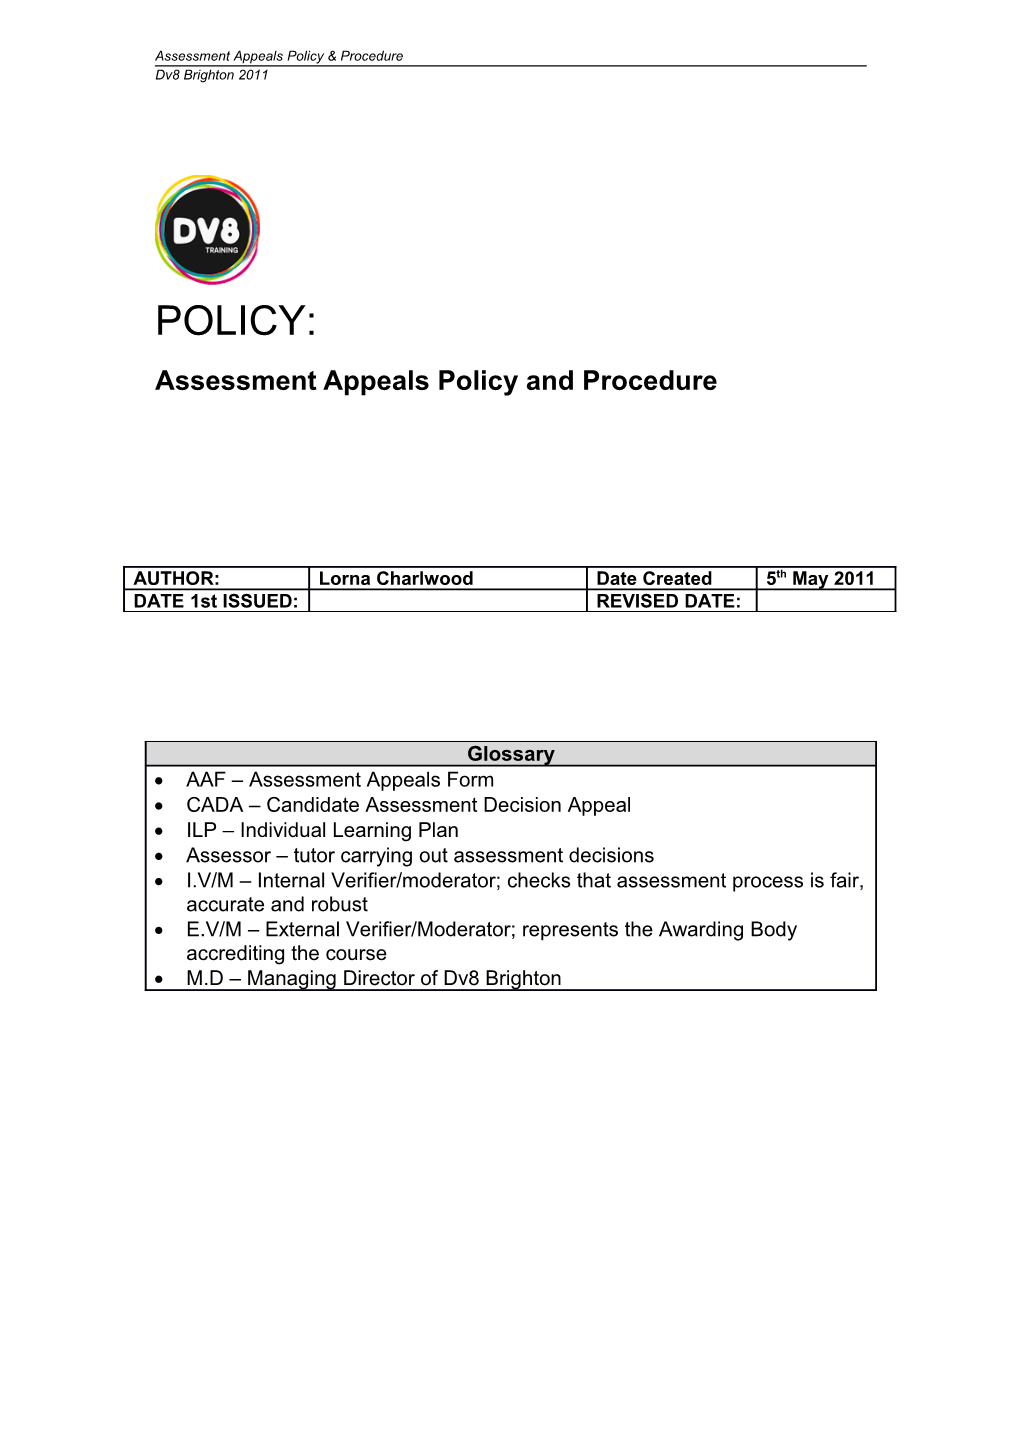 Assessment Appeals Policy and Procedure